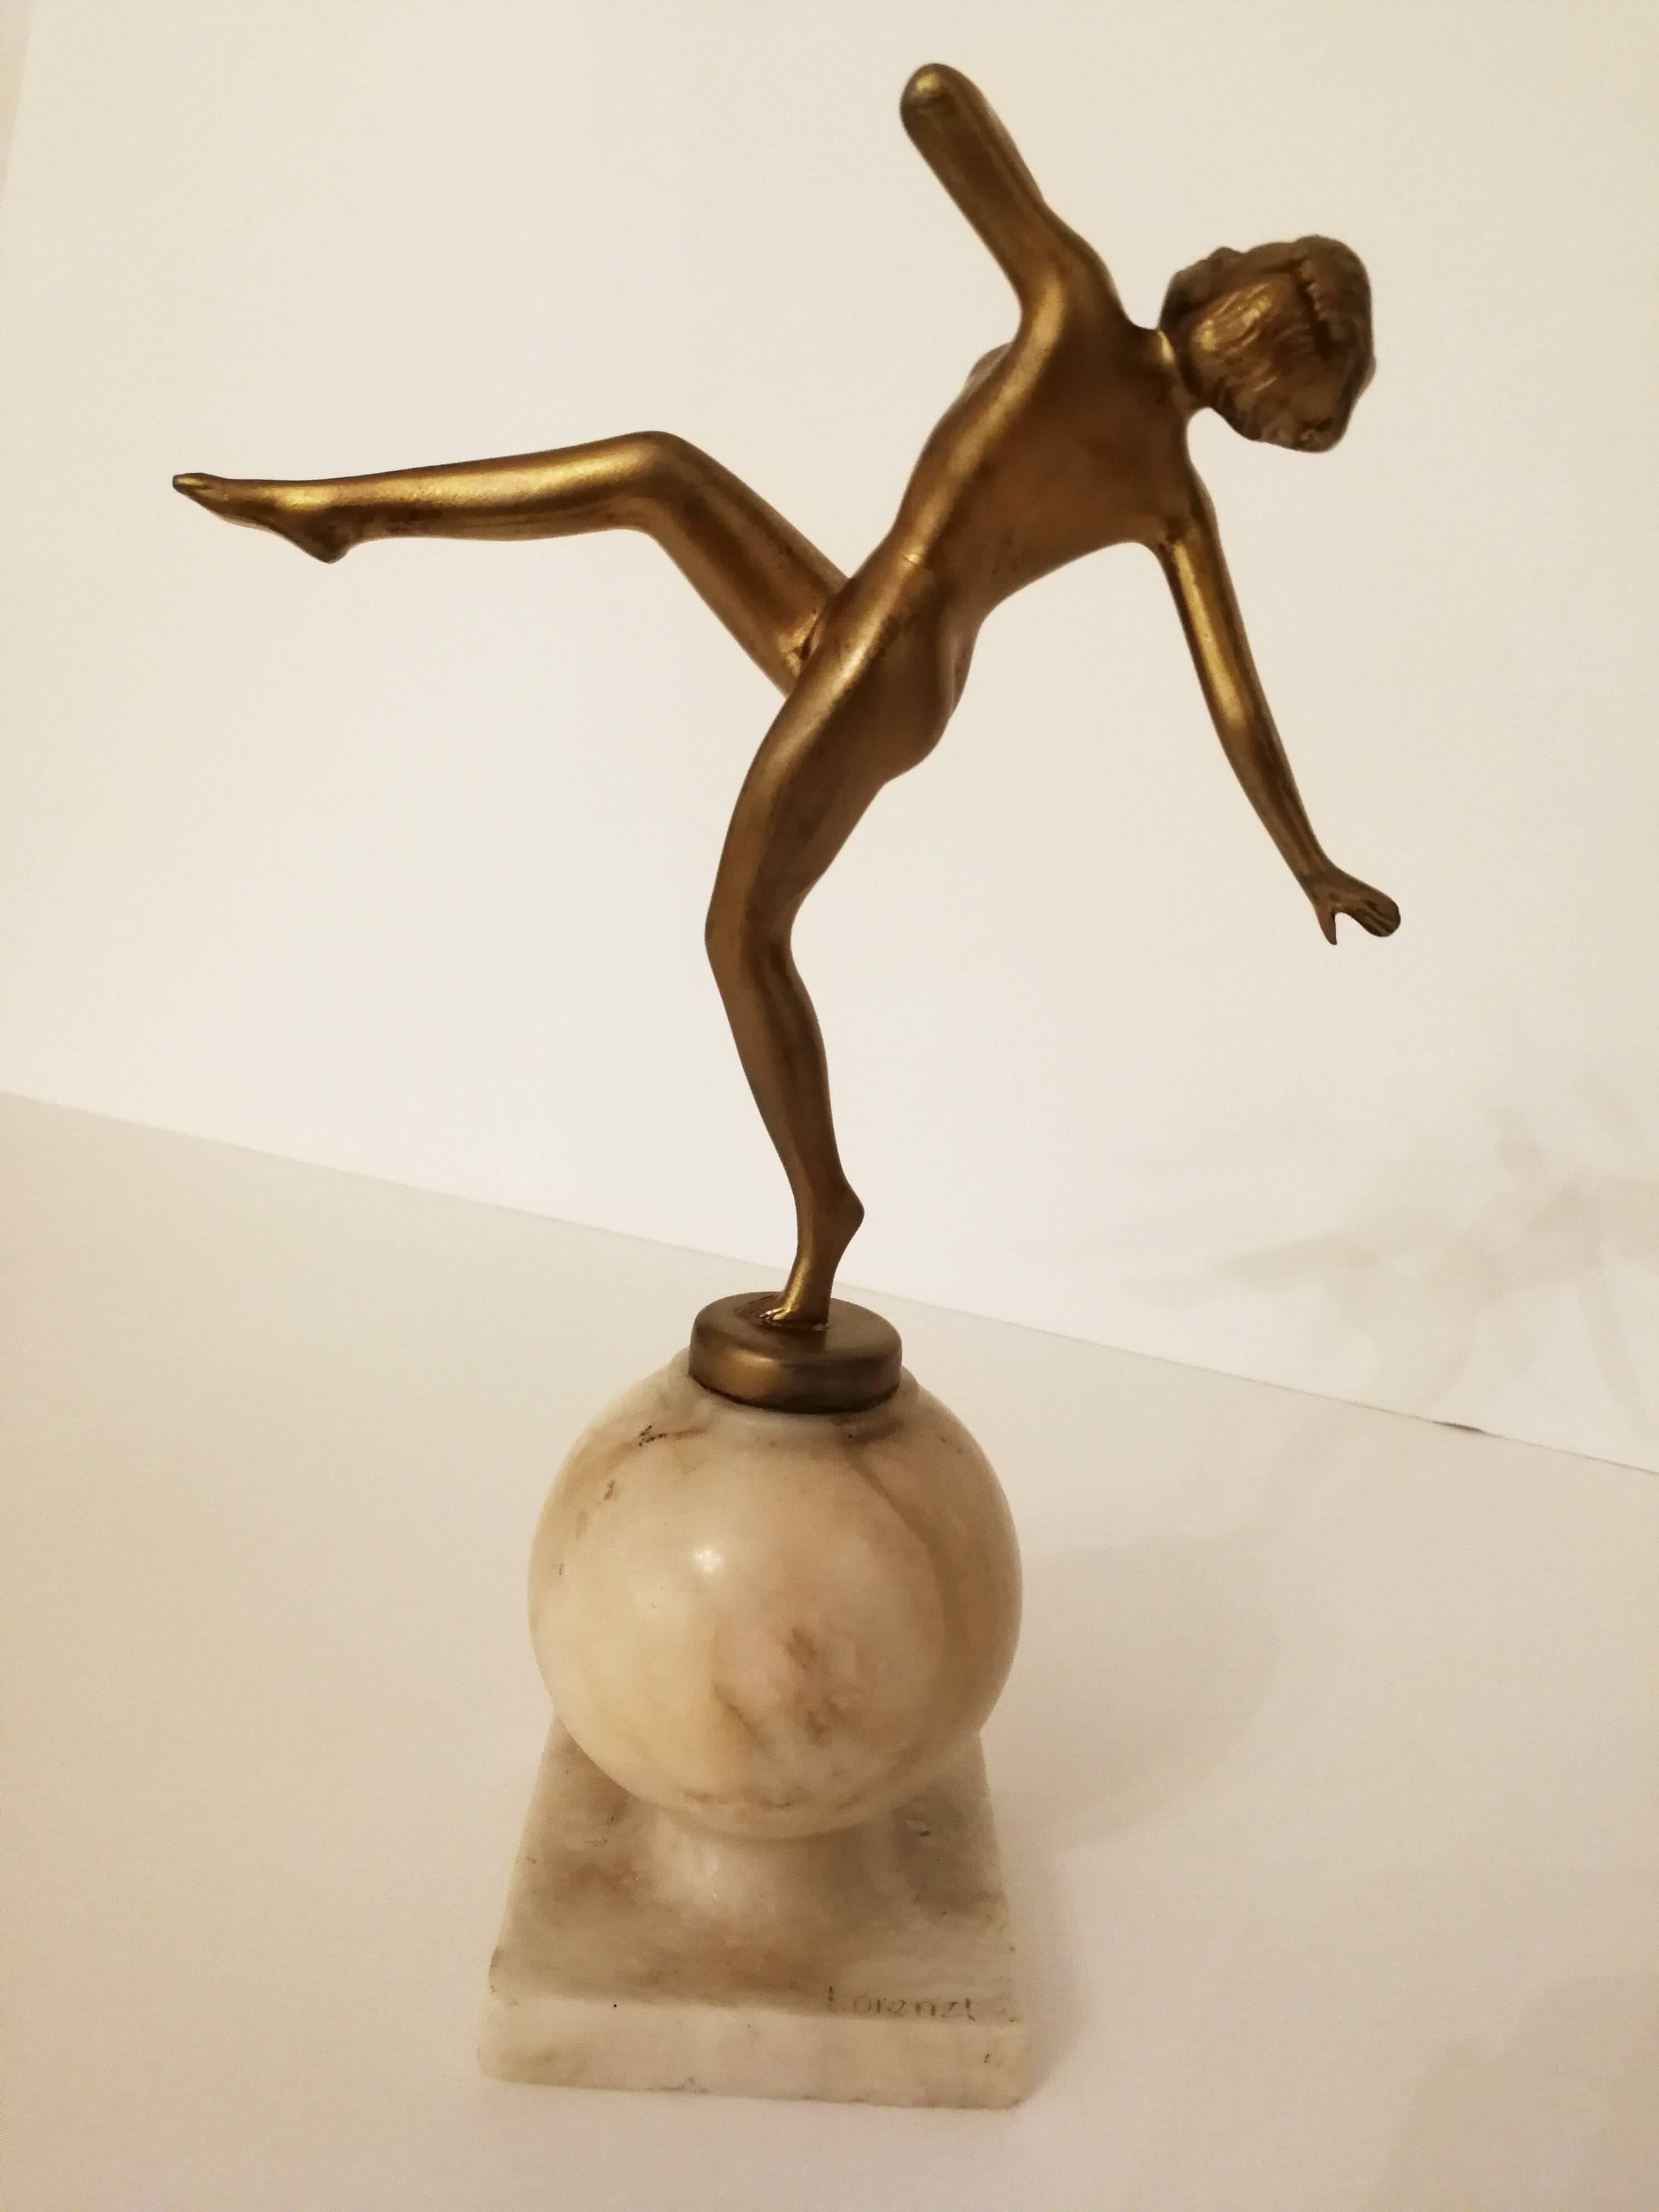 The attractive, naked golden figure is raising her leg and looking upwards in a dancing movement. The surface of her skin is completely smooth. She is standing on a little golden pedestal, which is placed on a ball formed marble base.

ARTIST
Josef